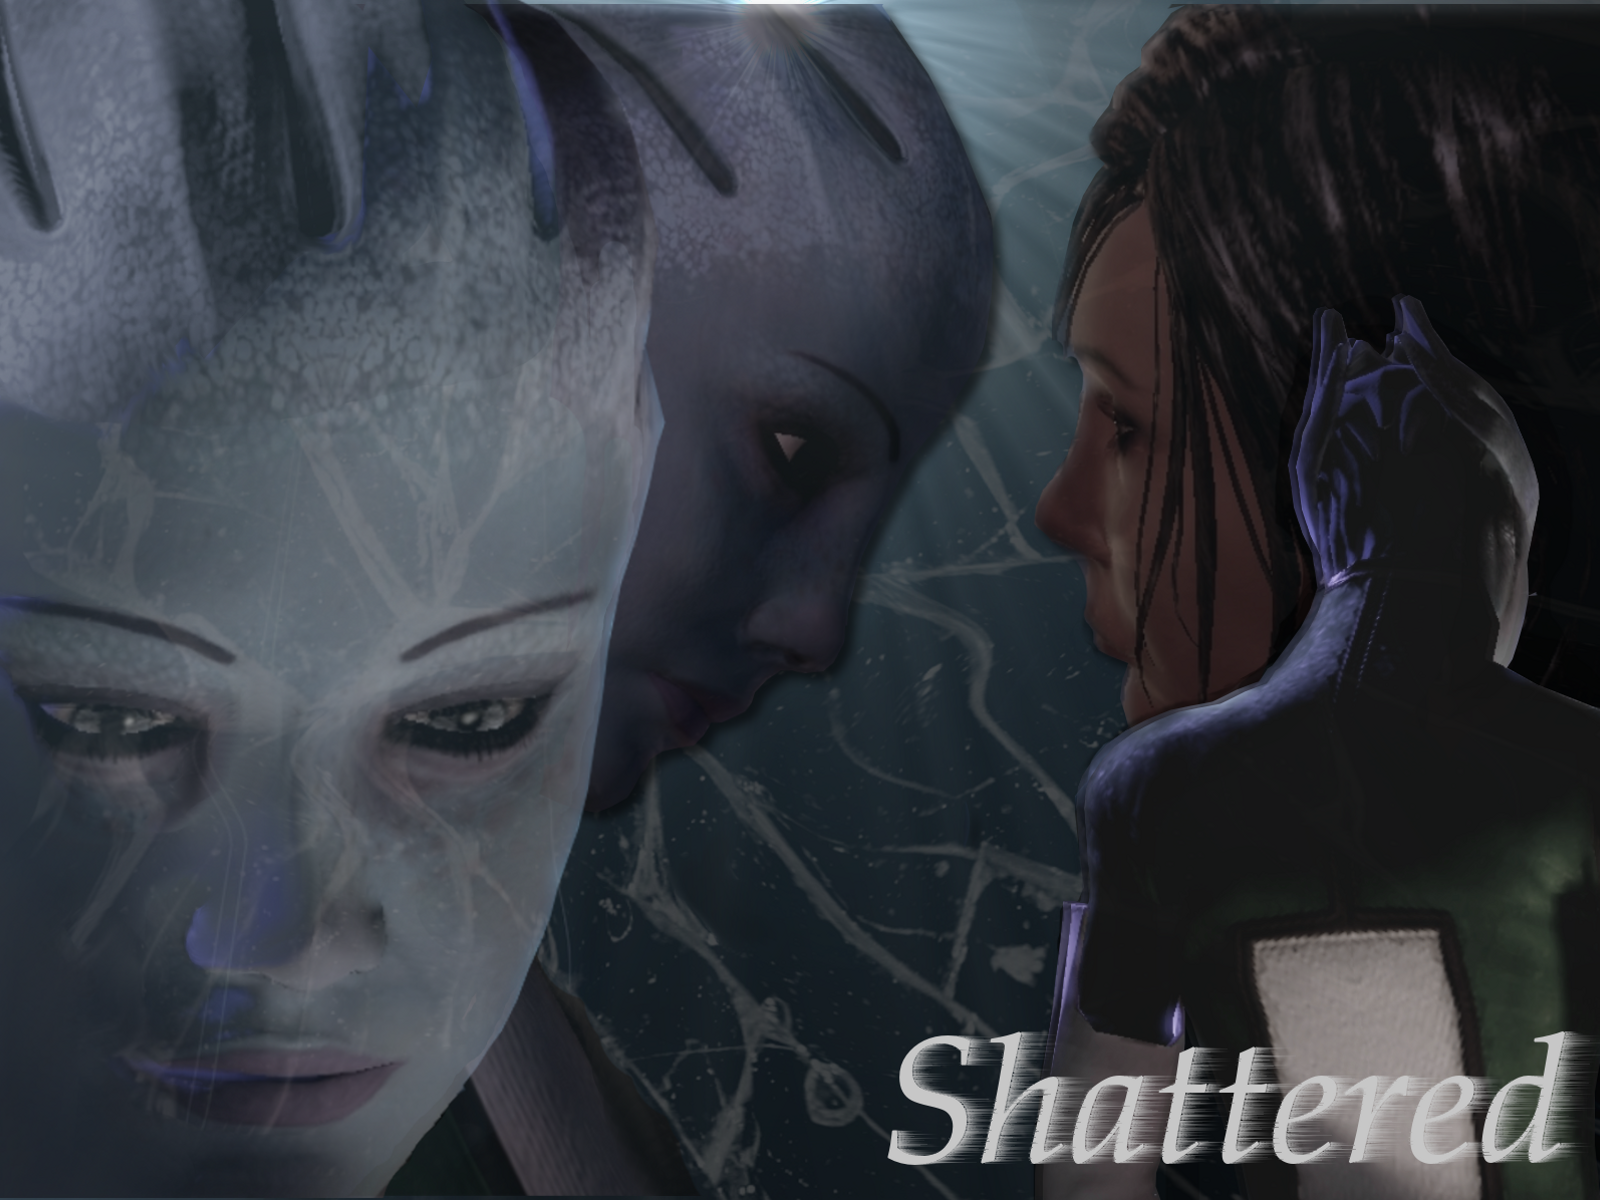 Shattered_by_jlb141.png